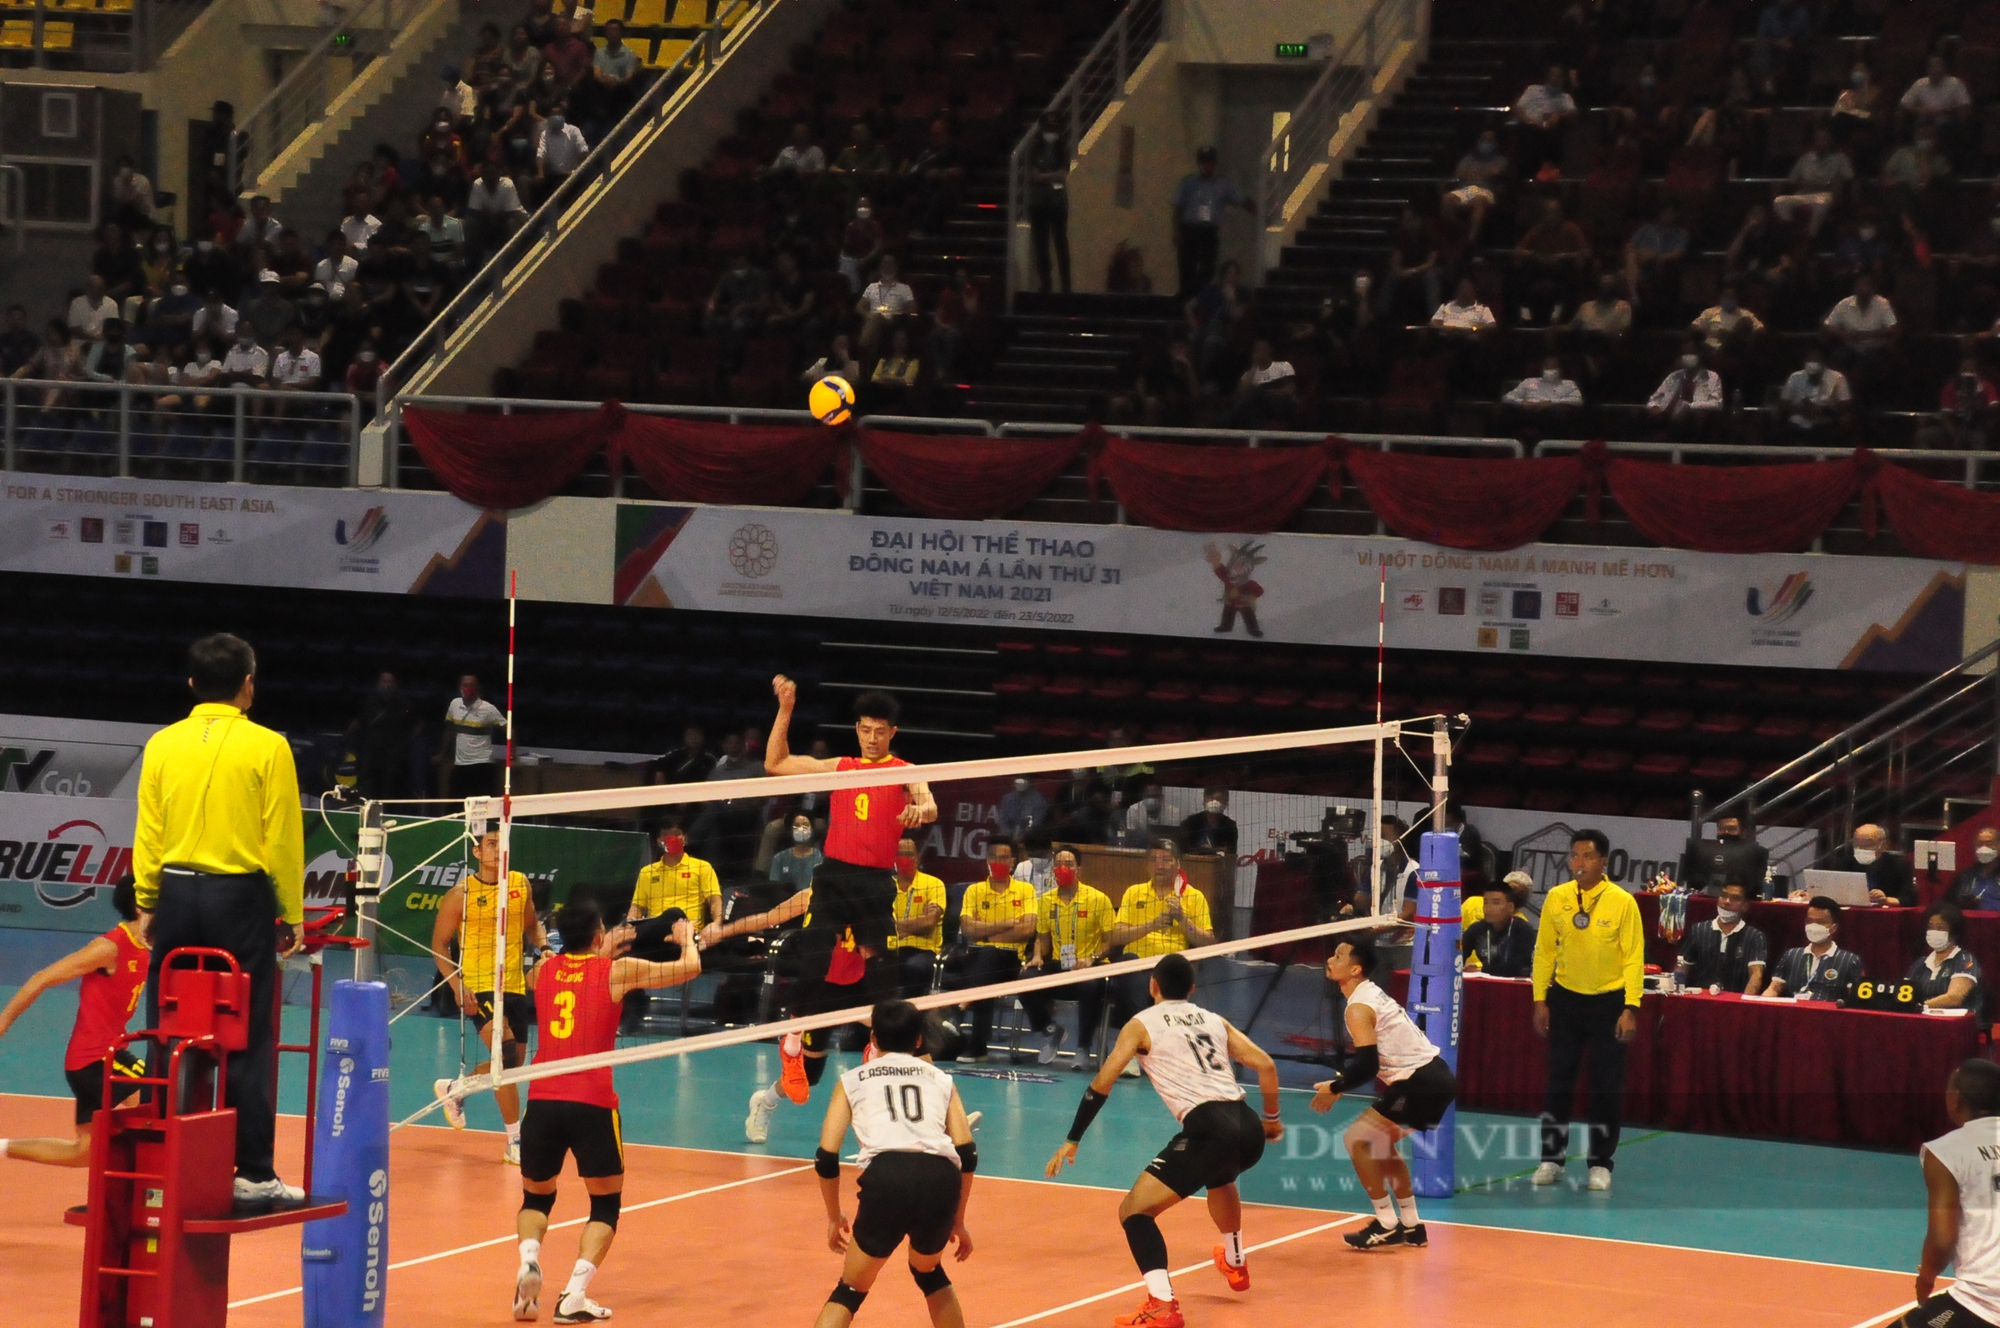 Fans are too hot, the Vietnamese men's volleyball team has come back spectacularly - Photo 1.